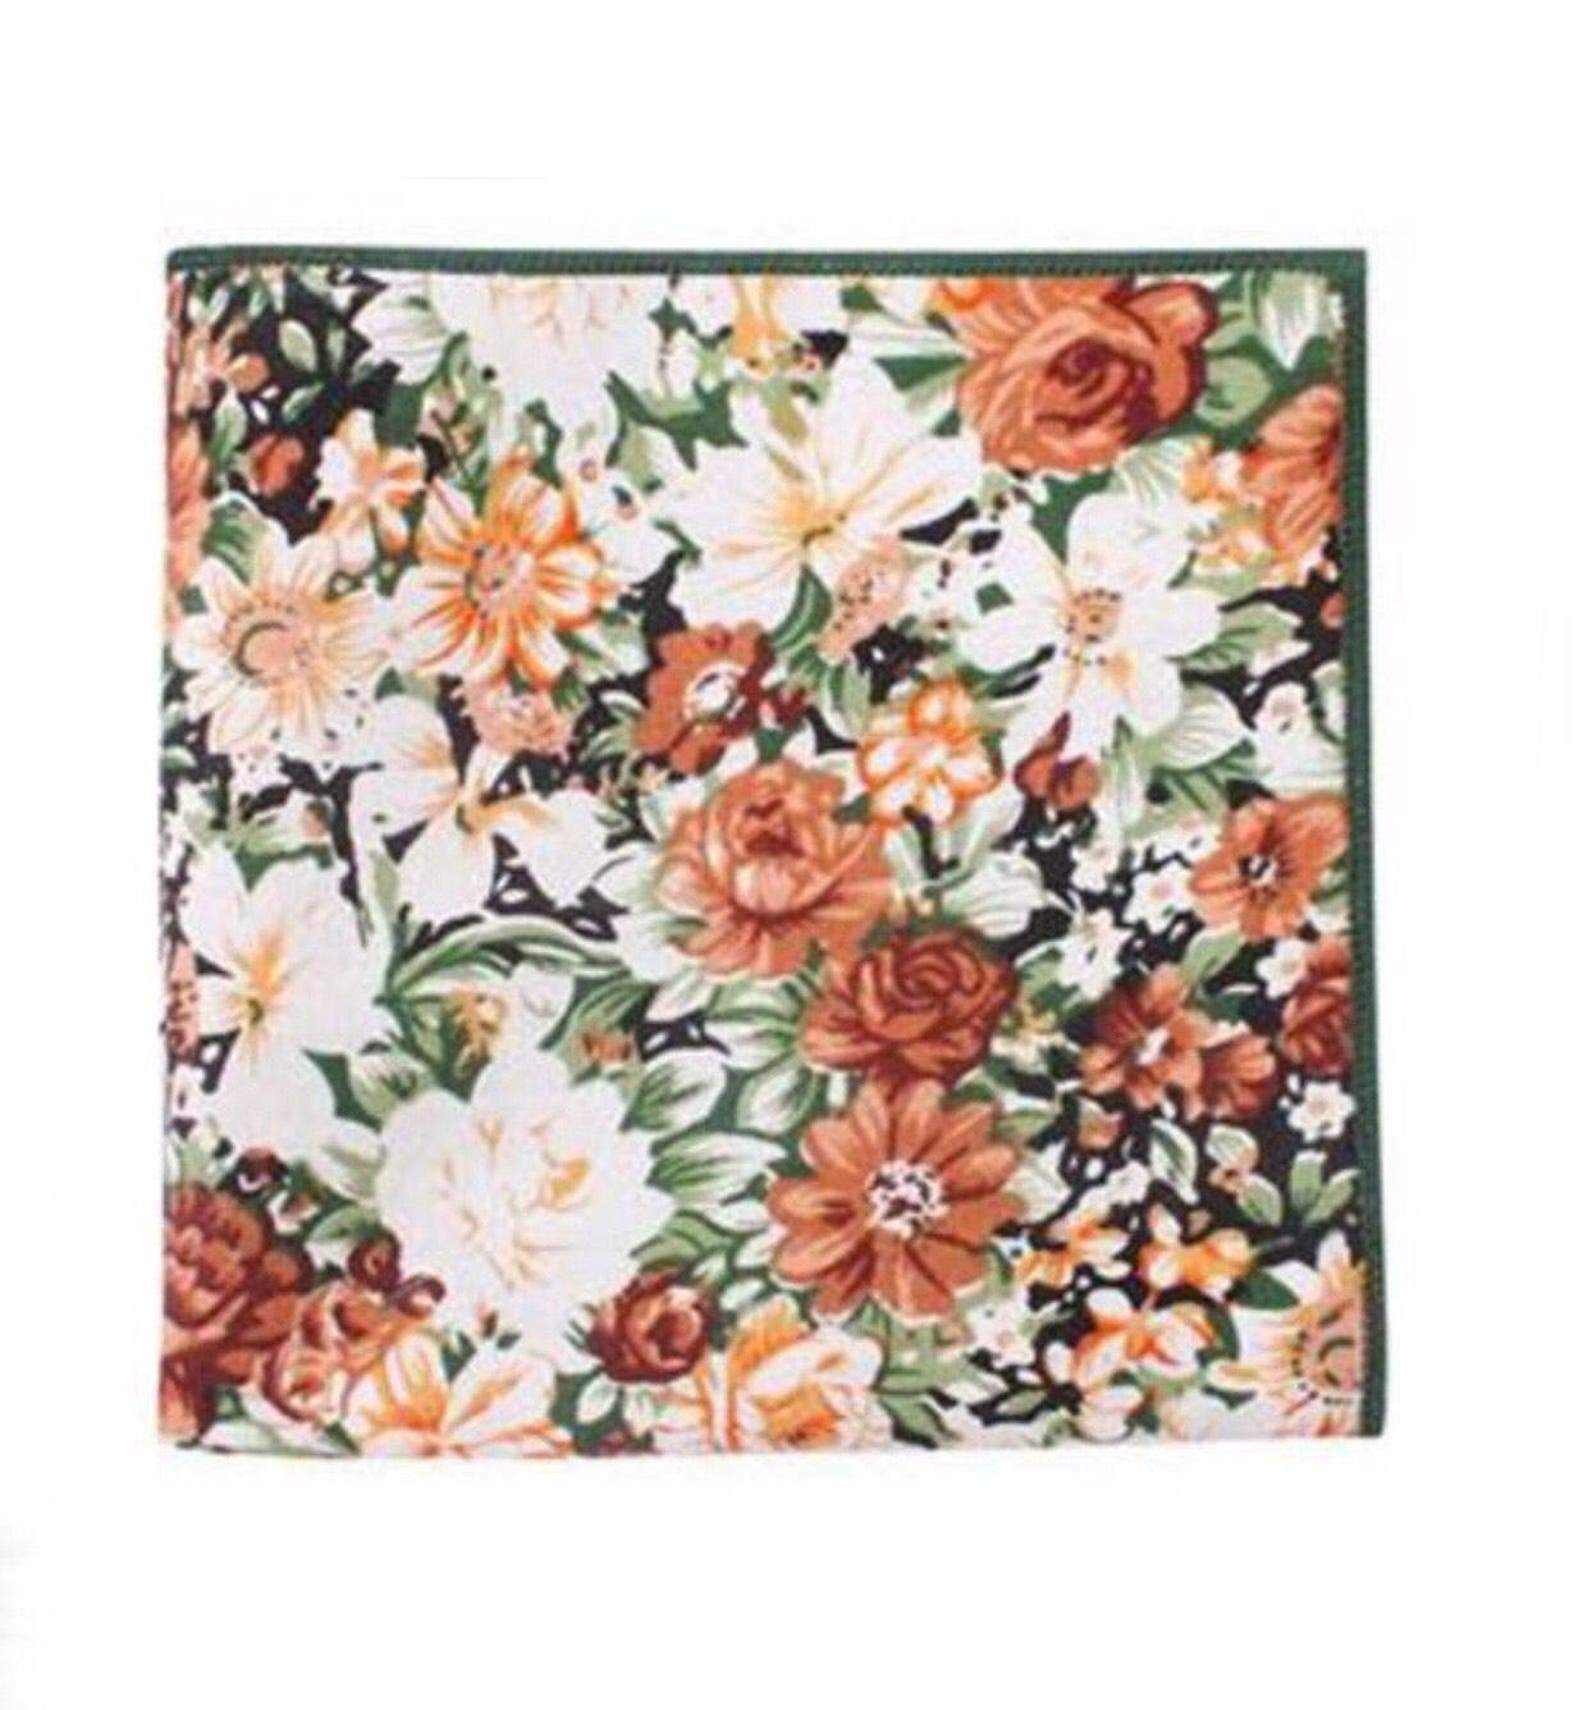 Orange Floral Pocket Square PEACH - MYTIESHOP | Orange Mytieshop Peach Floral Pocket Square Made from CottonItem Length: 23 cm ( 9 inches)Item Width : 22 cm (8.6 inches) Background Color: Black Trim: GreenA dashing addition to any outfit. This pocket square is the perfect way to spruce up your suit for any formal event. With a bright and colorful orange floral print, it'll add some personality to your look. Whether you're dressing up for a wedding or just accenting your everyday style, this pock